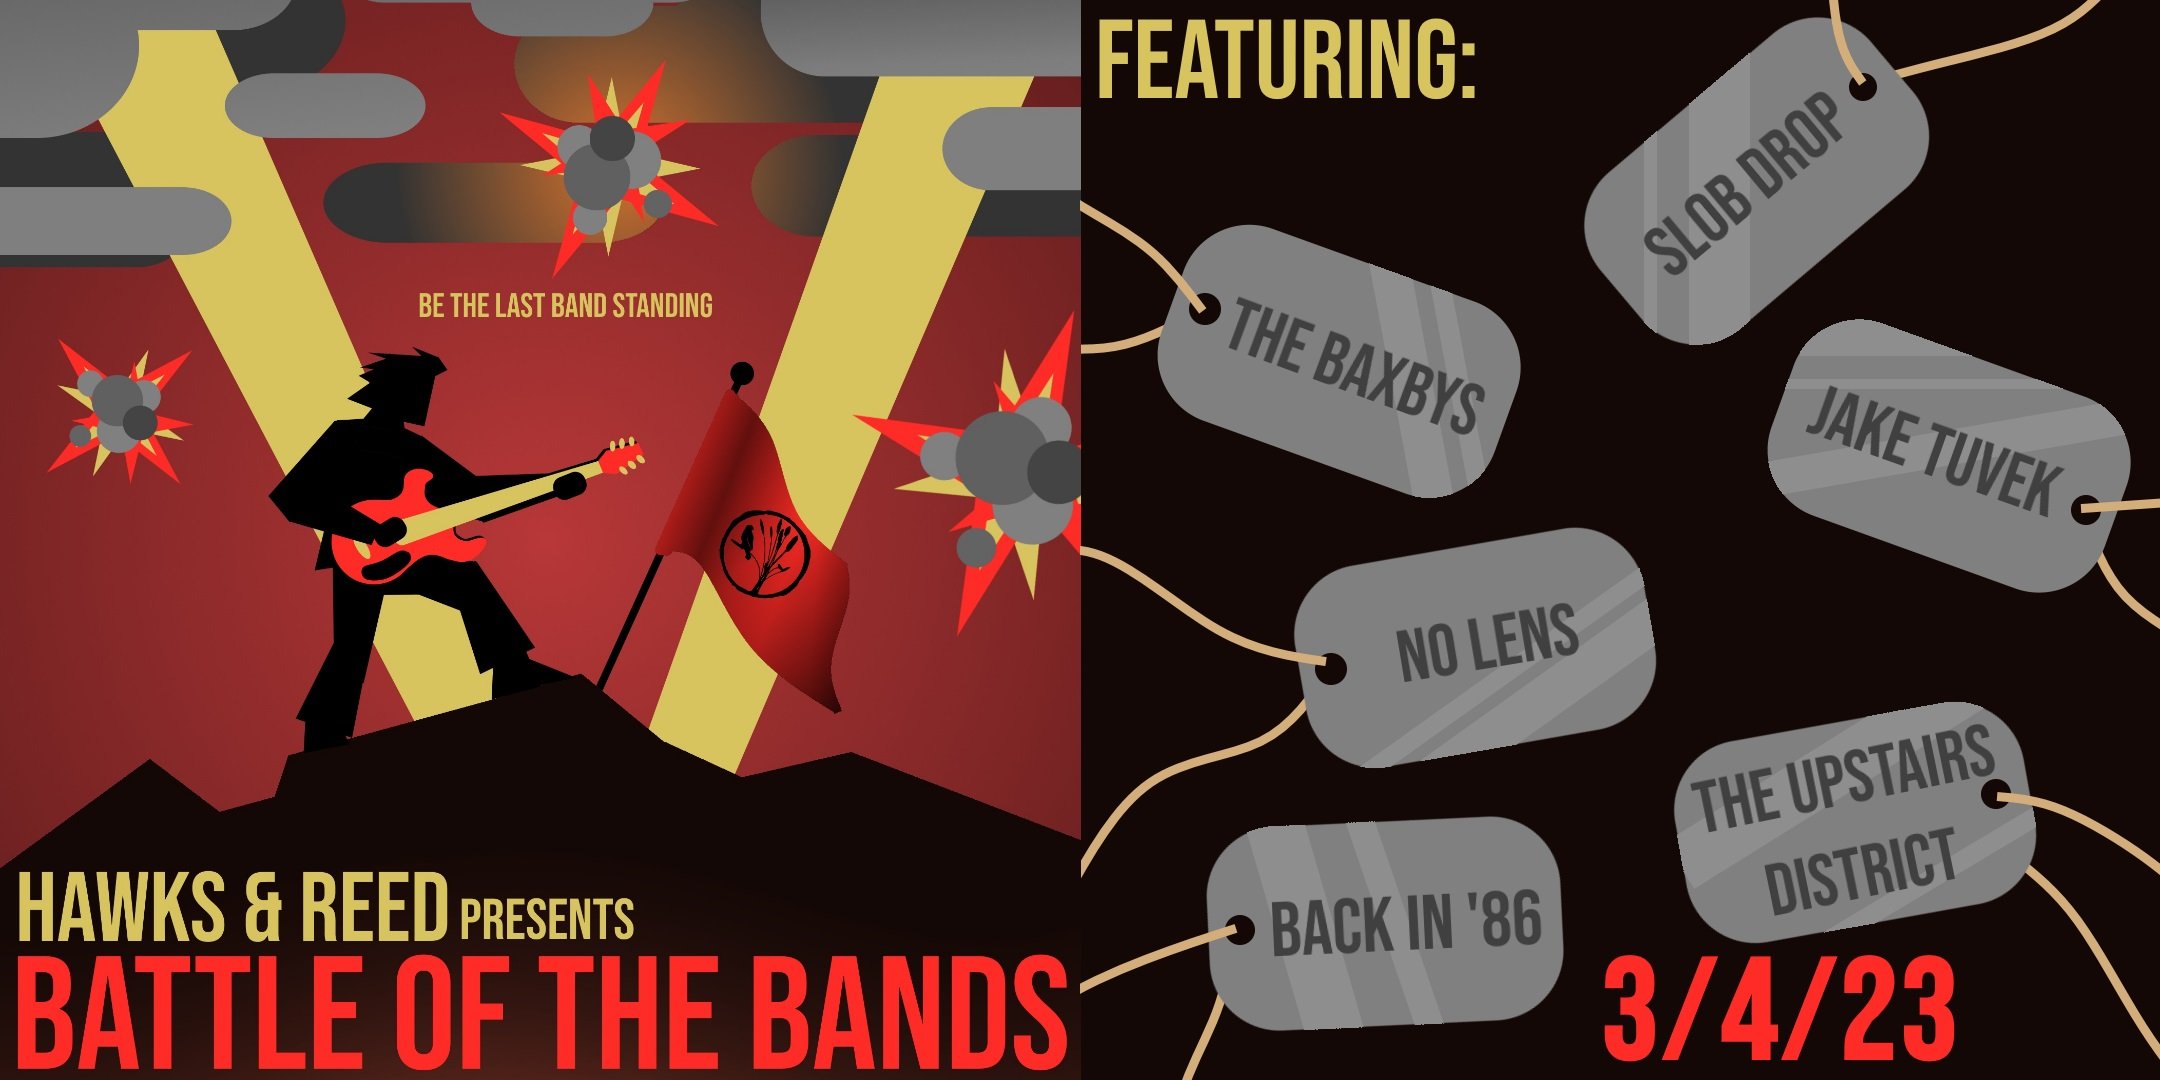 Battle of the Bands: No Lens / The Upstairs District / The Baxbys / The Agonizers / SLOB DROP / Jake Tuvek